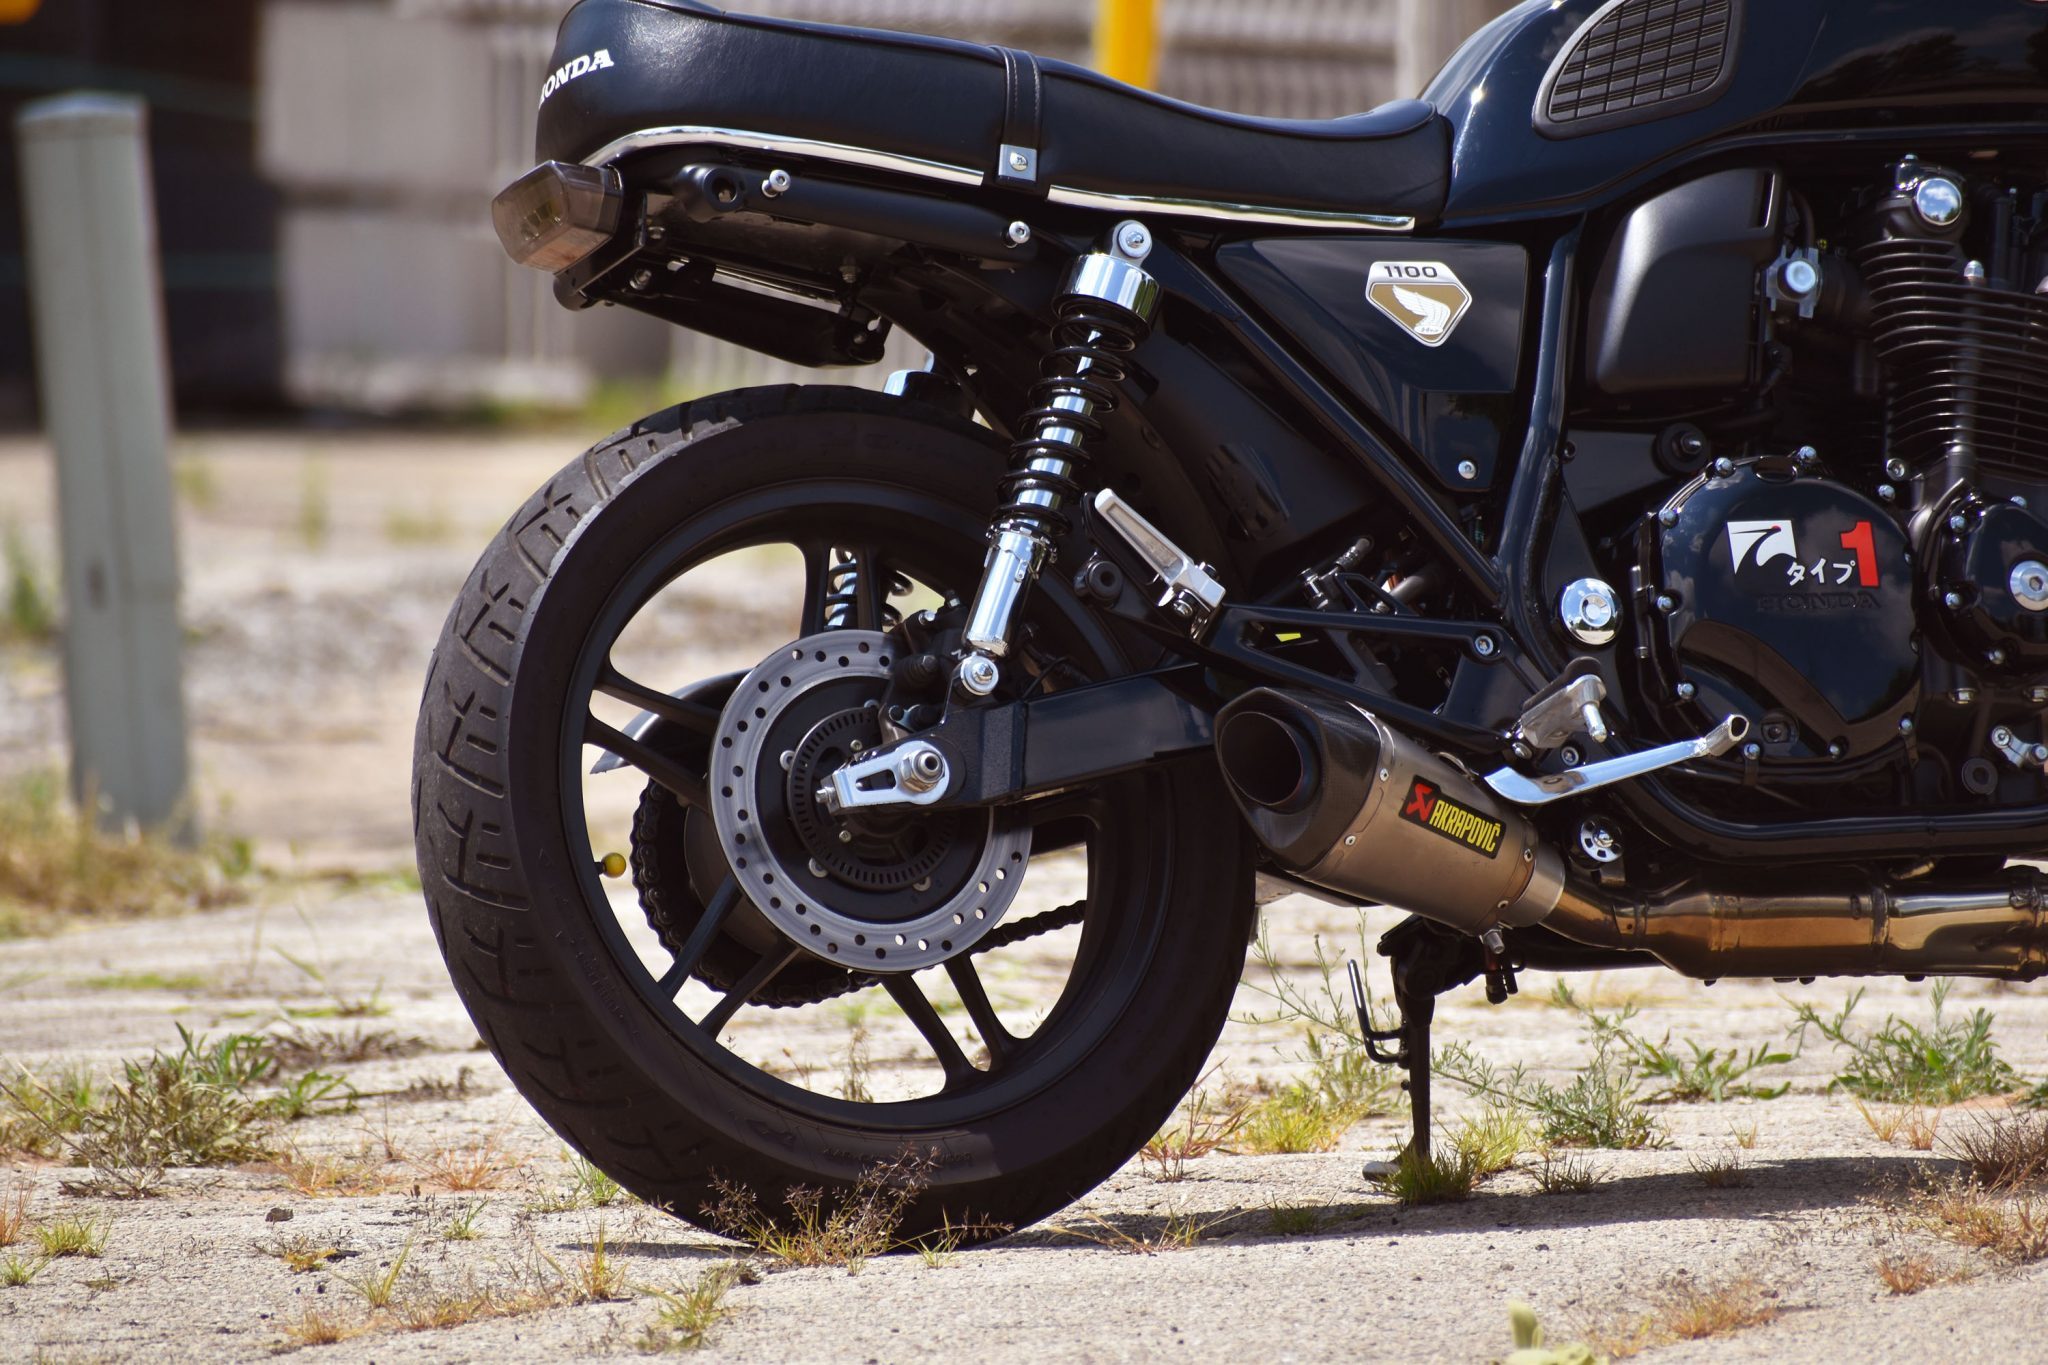 Honda CB500 “Tribute” Is an Aptly Named Restomod Honoring the Good Old Days  - autoevolution